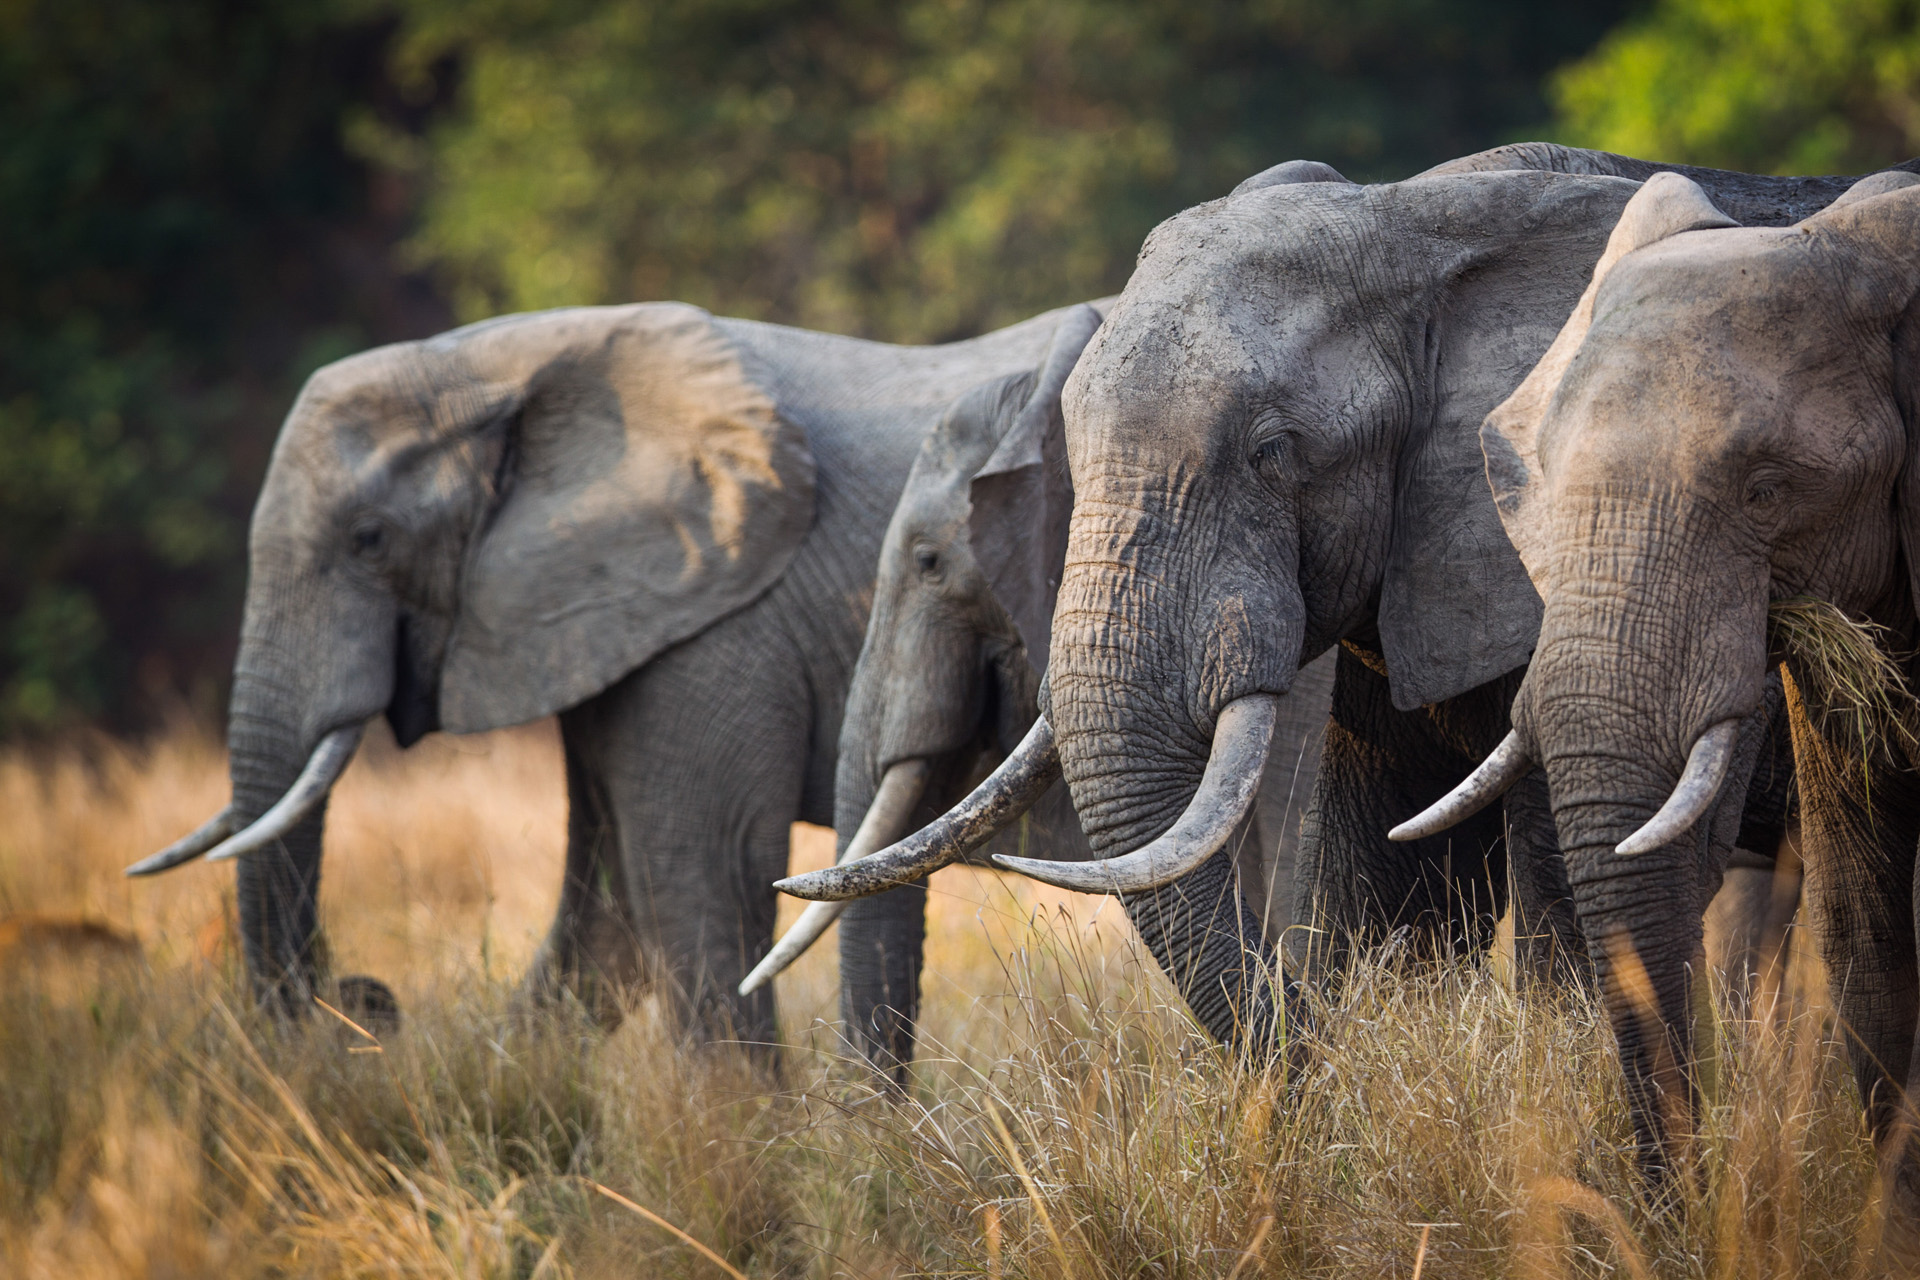 Elephants in the South Luangwa